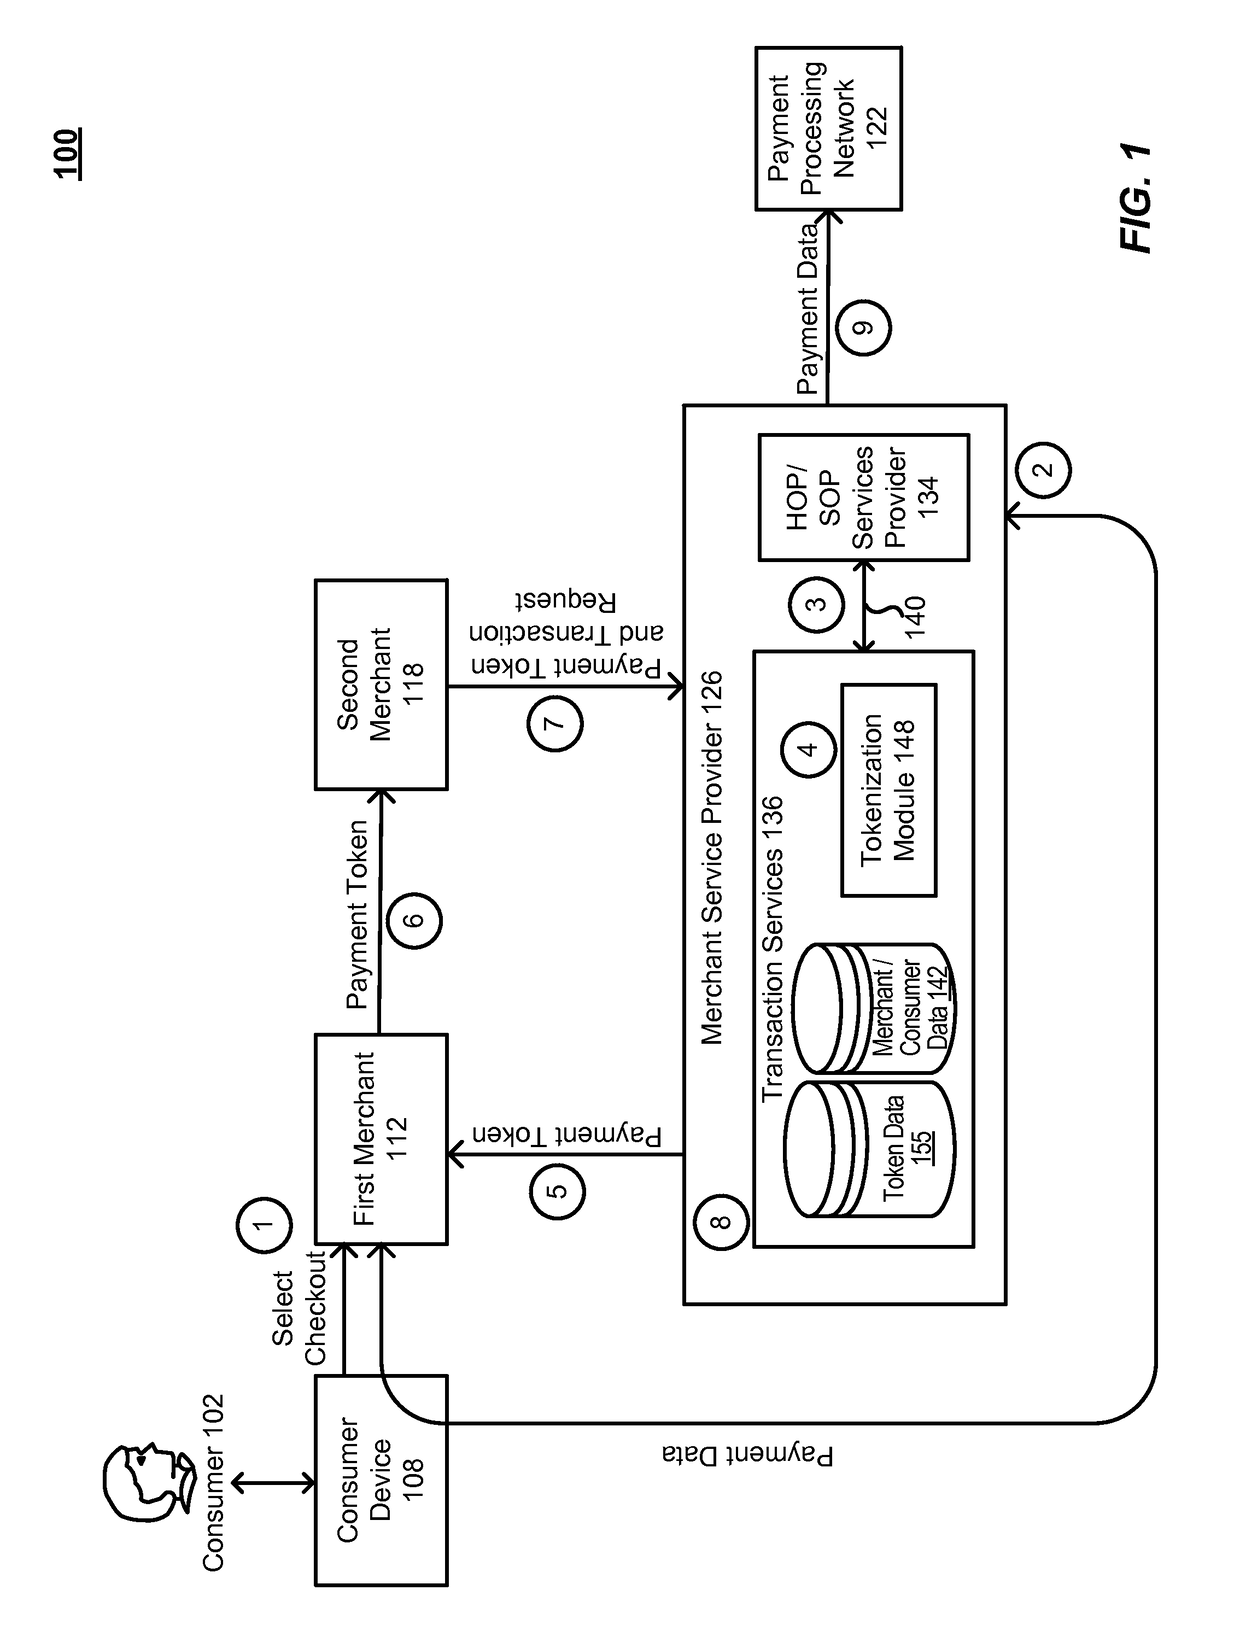 System and method of providing tokenization as a service